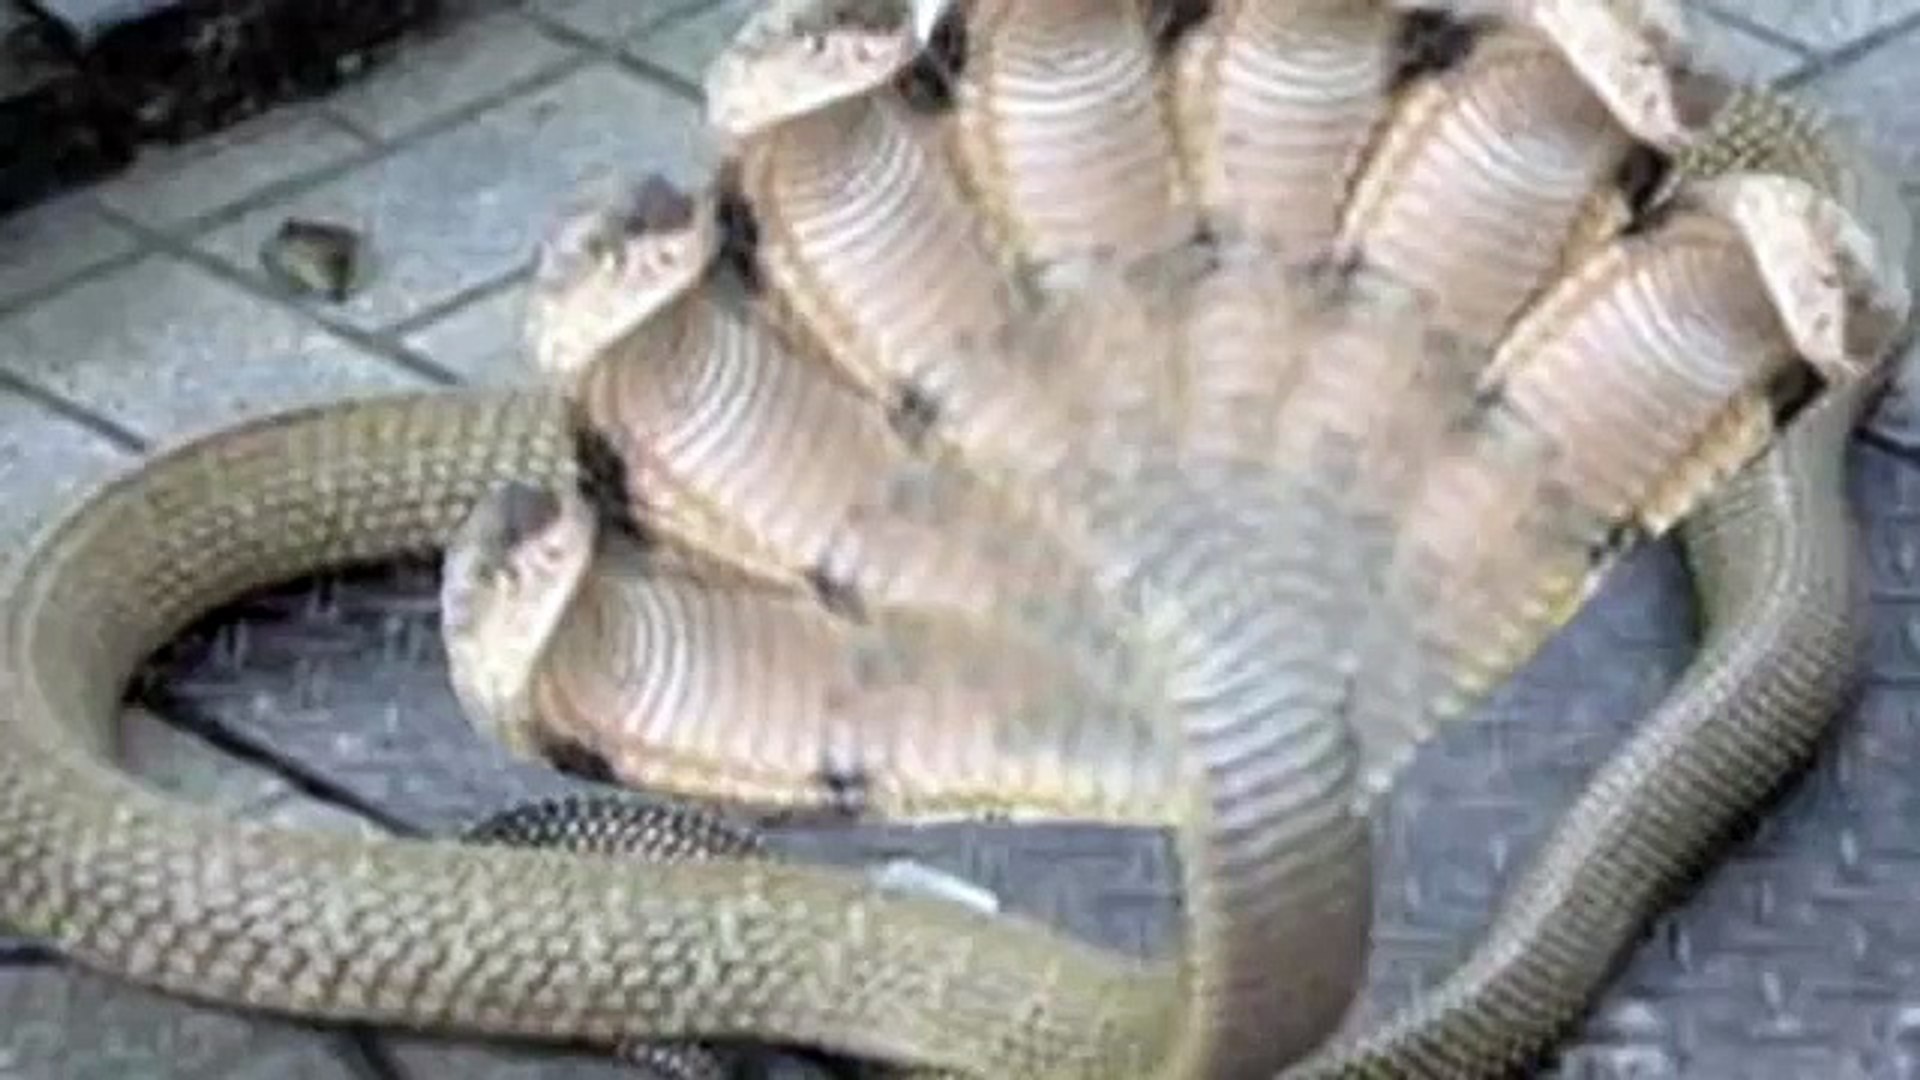 People in India were shocked to discover an extremely unusual 